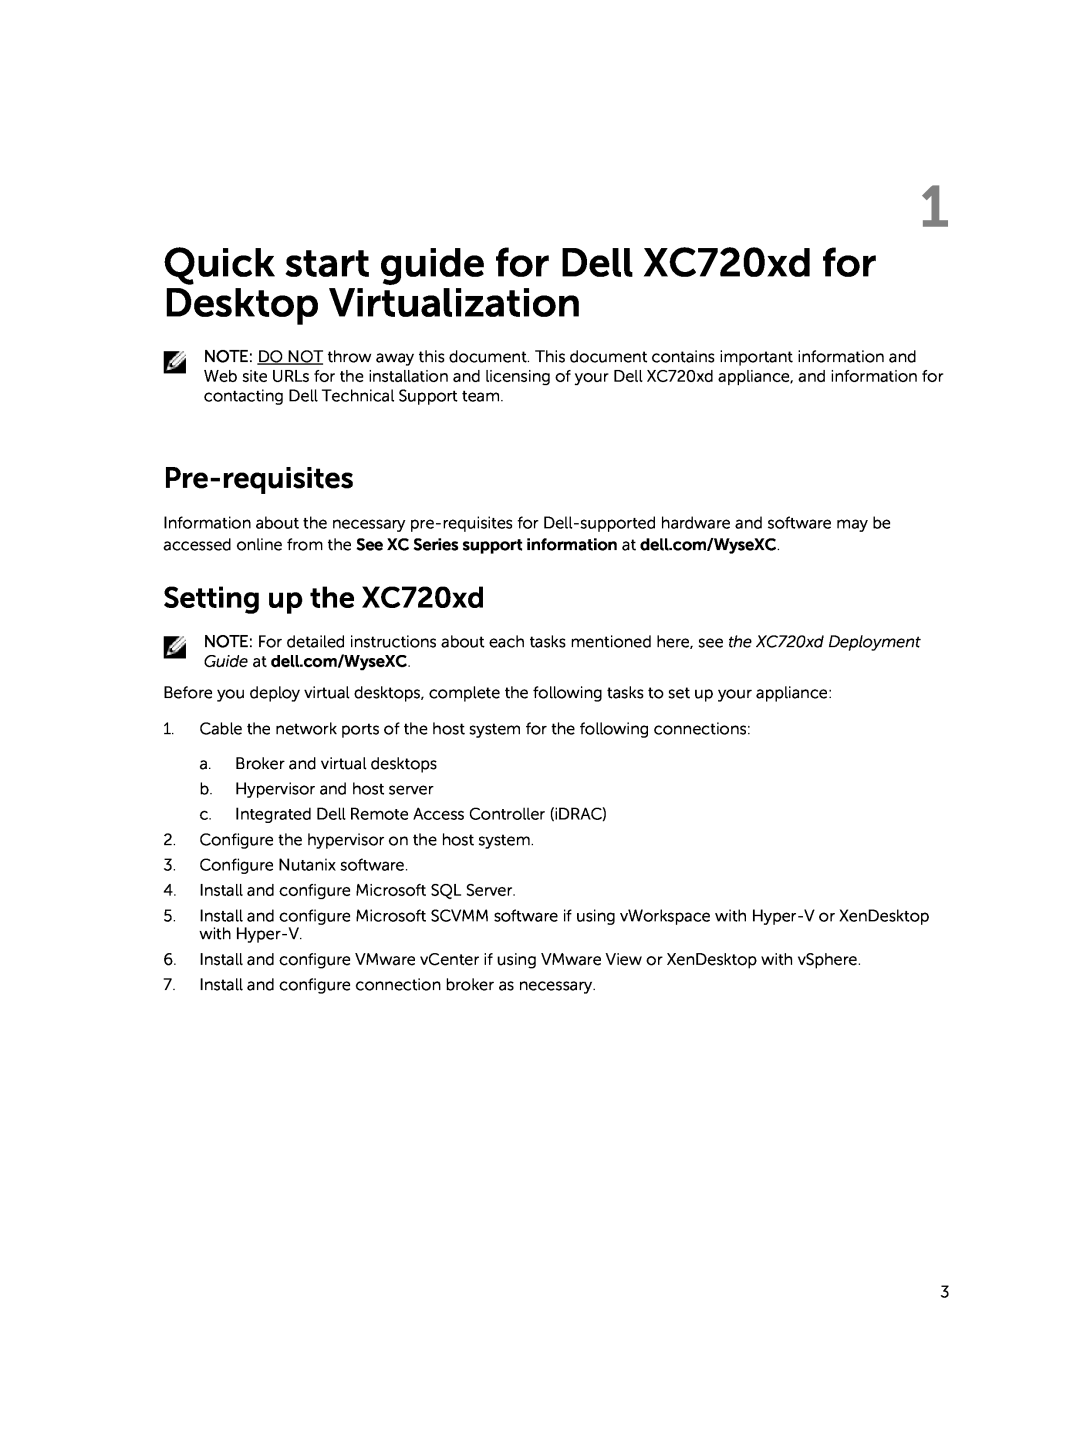 Dell E14S Series Quick start guide for Dell XC720xd for Desktop Virtualization, Pre-requisites, Setting up the XC720xd 